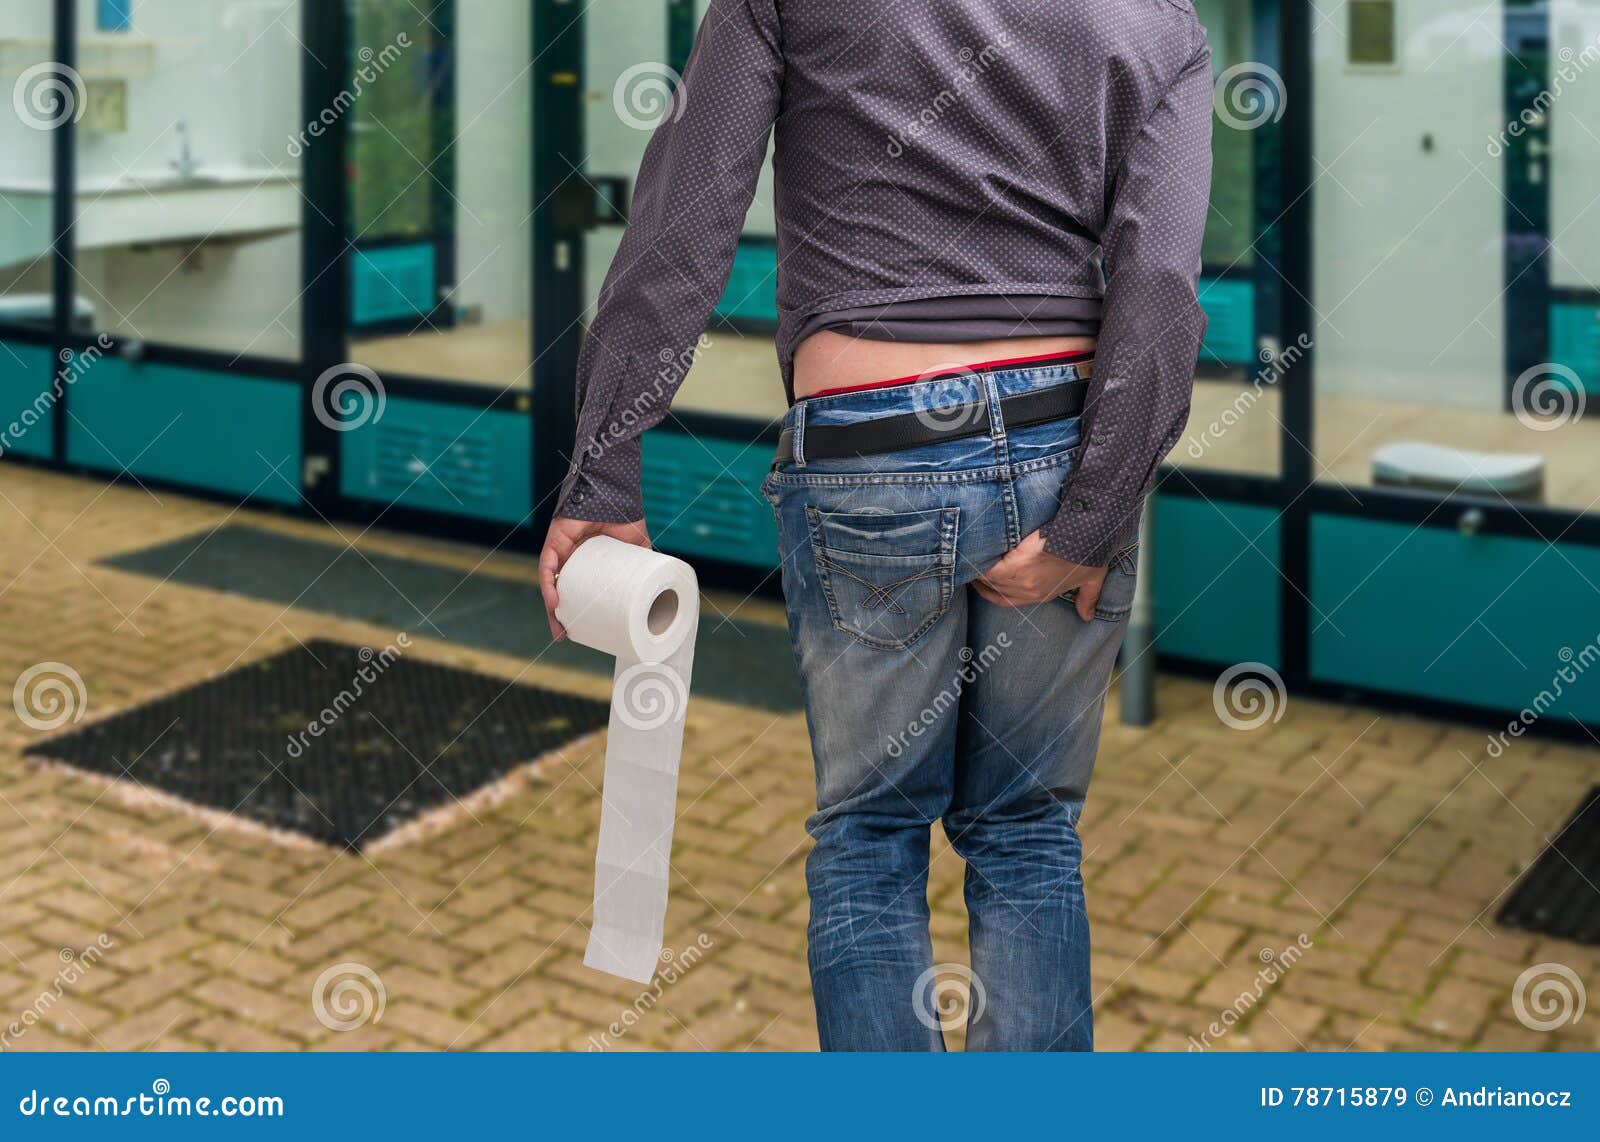 man has diarrhea. man holding toilet paper and his butt.